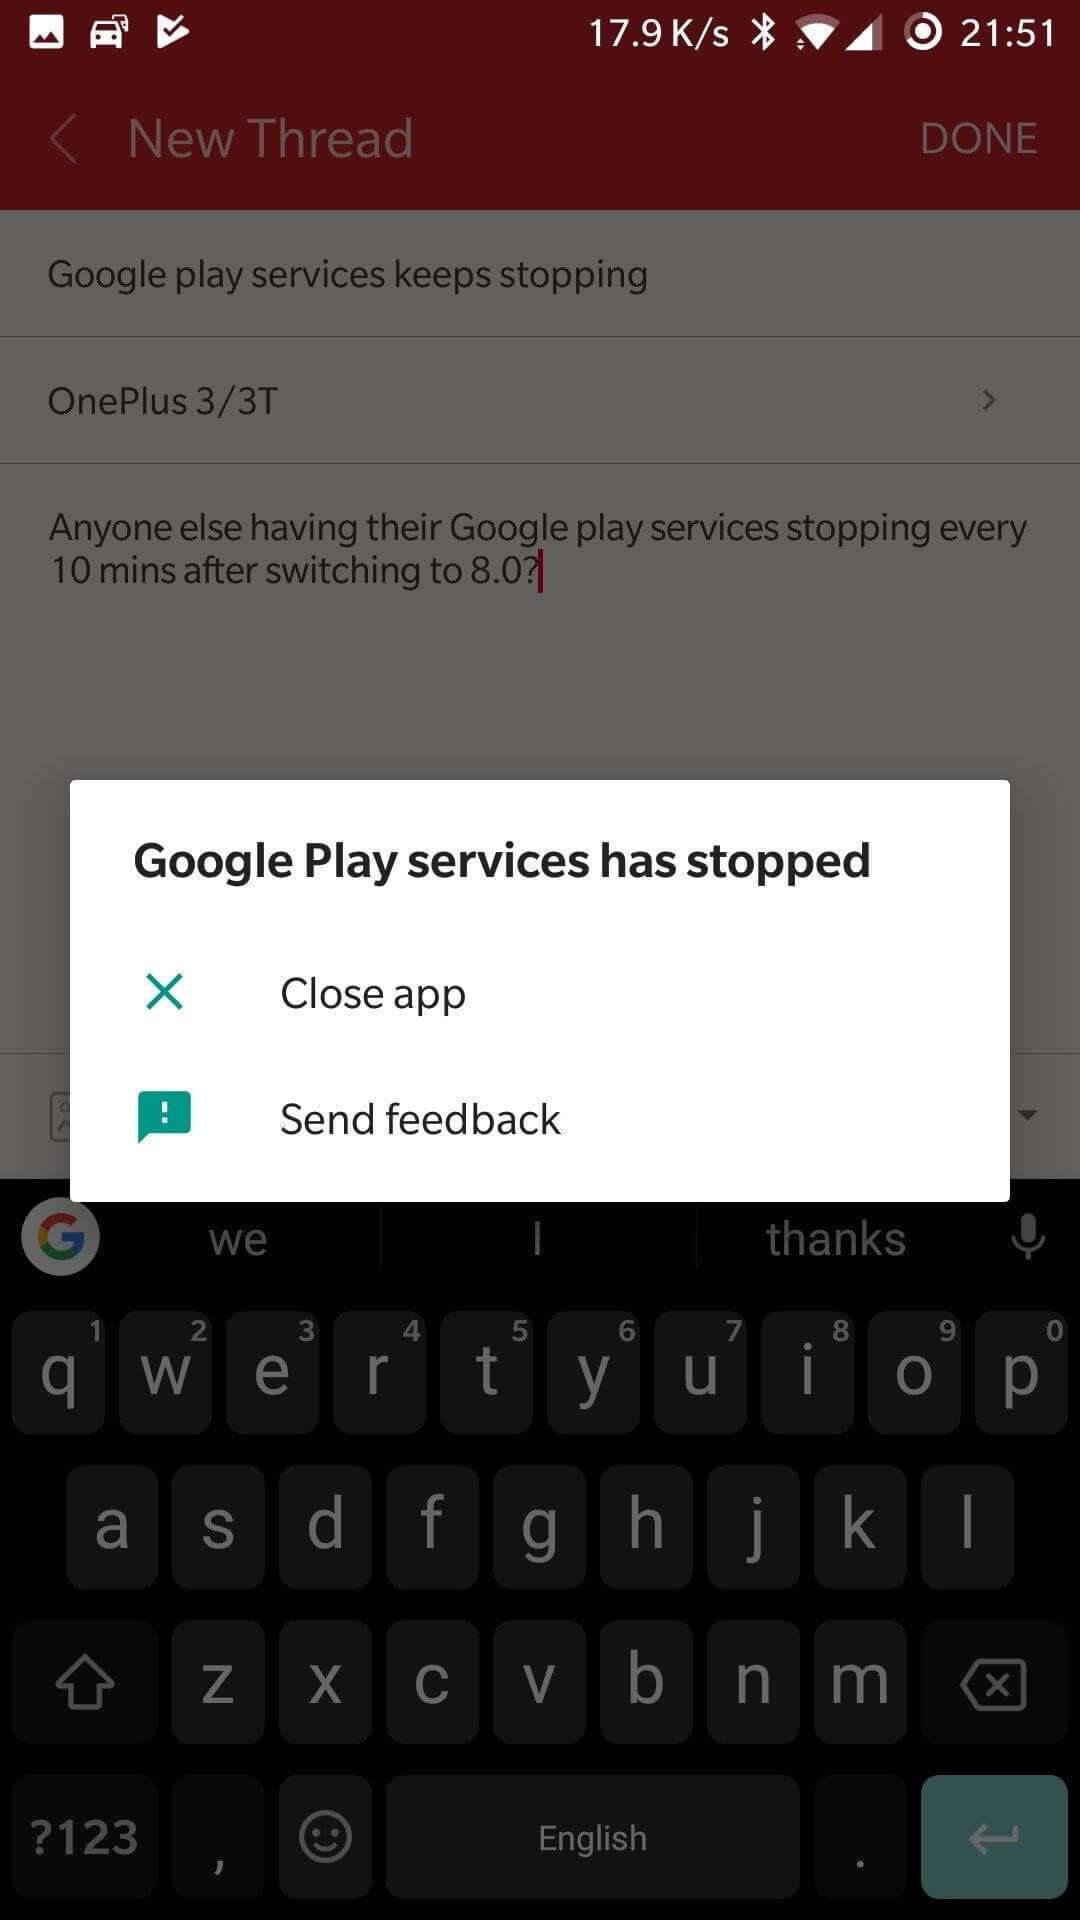 Google Play Services Keeps Stopping 2023? (Here's the Fix)